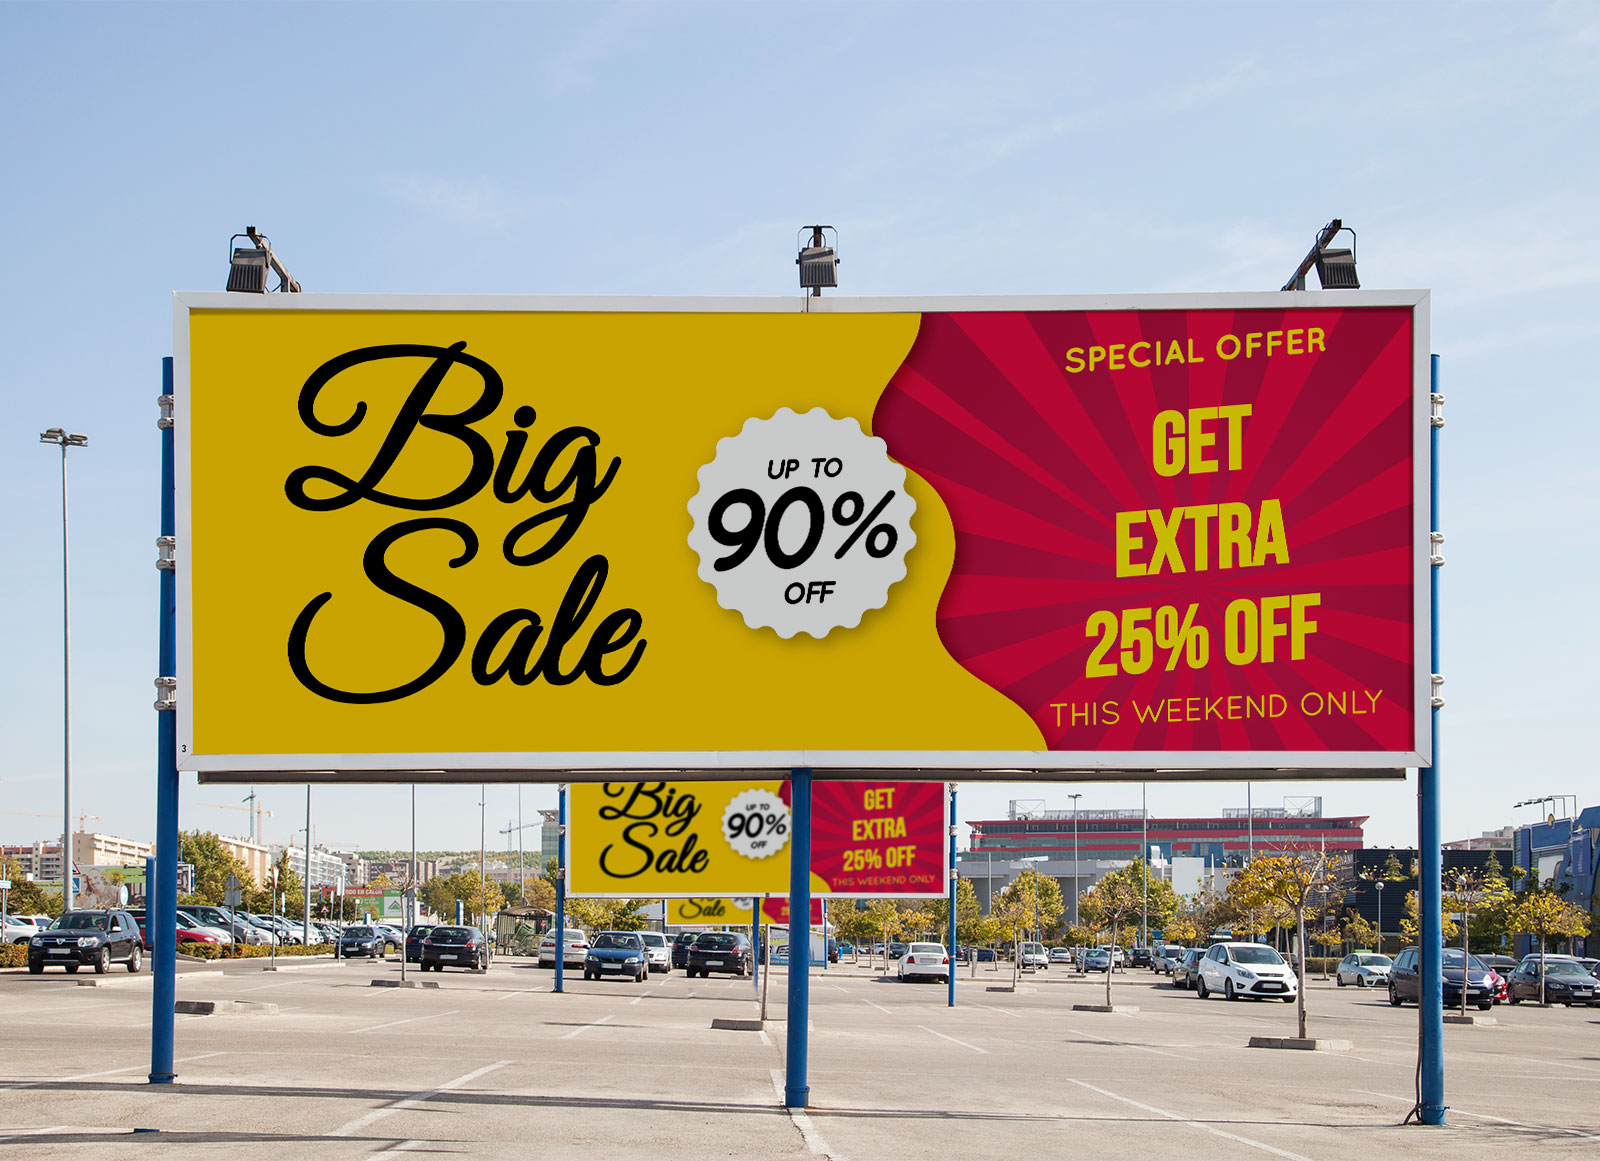 Free-Sale-Discount-Special-Offer-Off-Billboard-At-Parking-Lot-Mockup-PSD